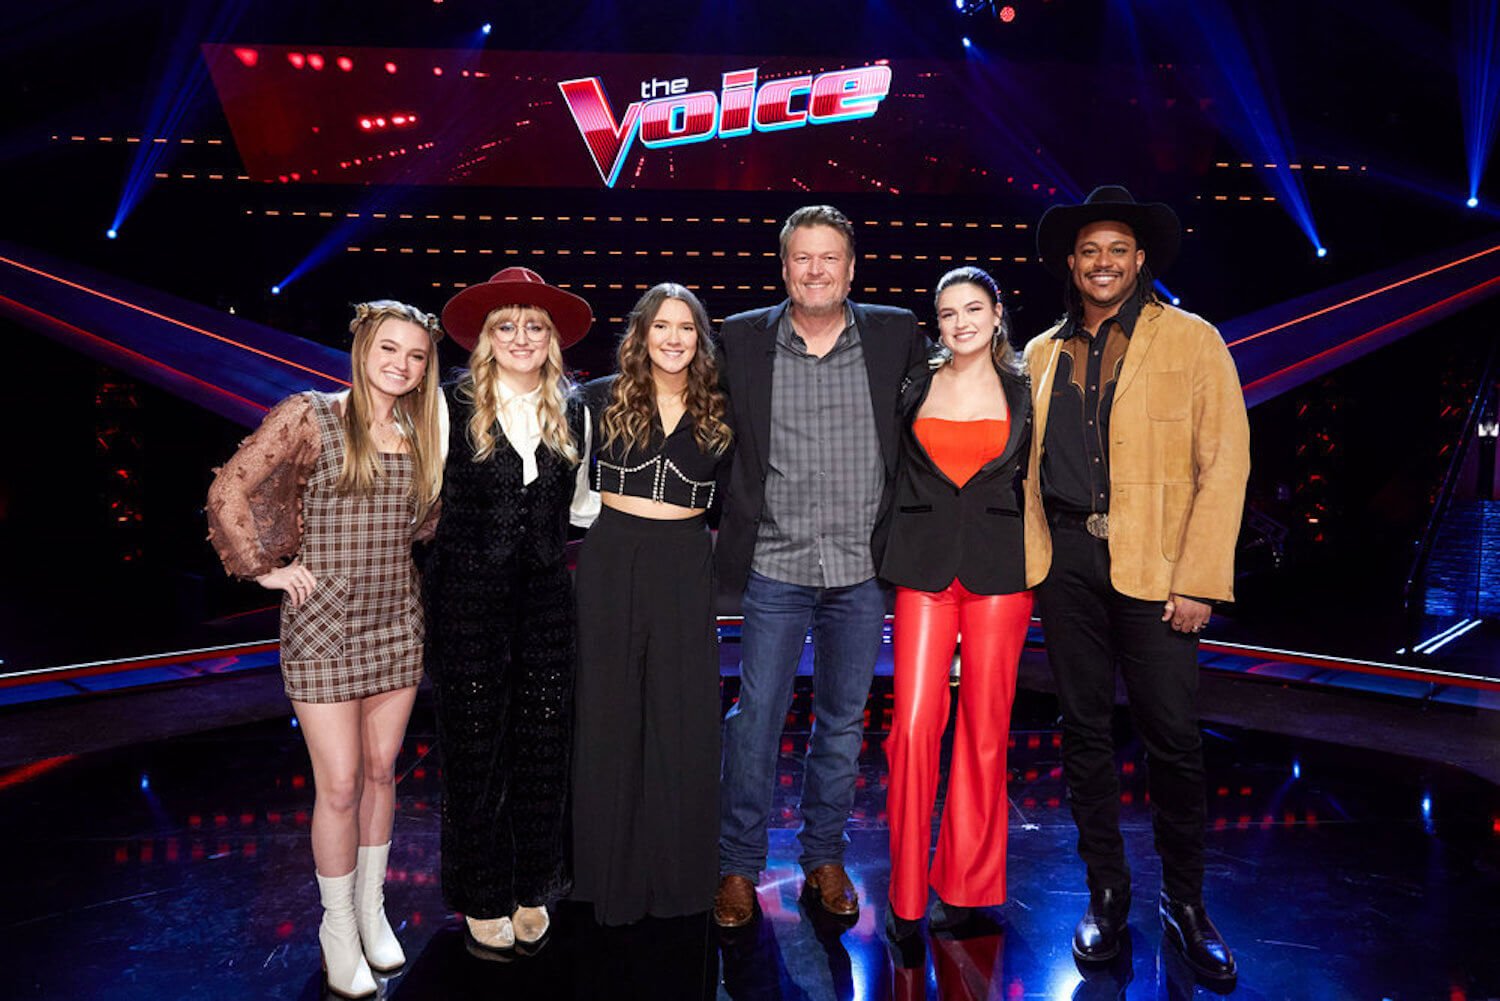 Blake Shelton standing on a stage with 'The Voice' Season 23 contestants ahead of the Playoffs